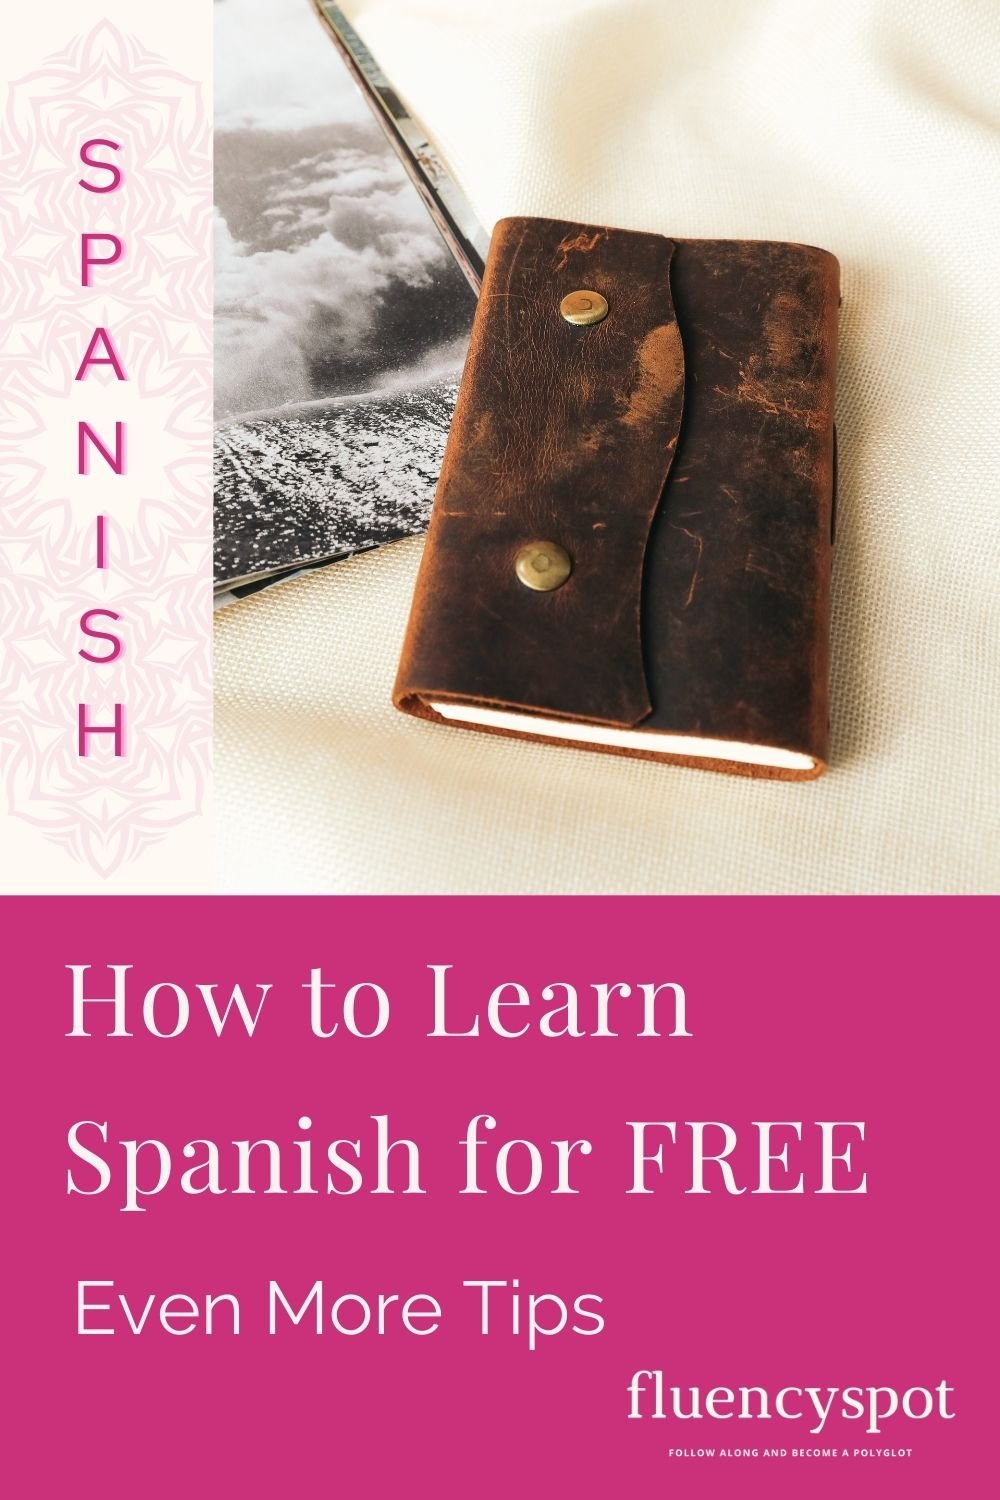 How to Learn Spanish for free. Even More Tips